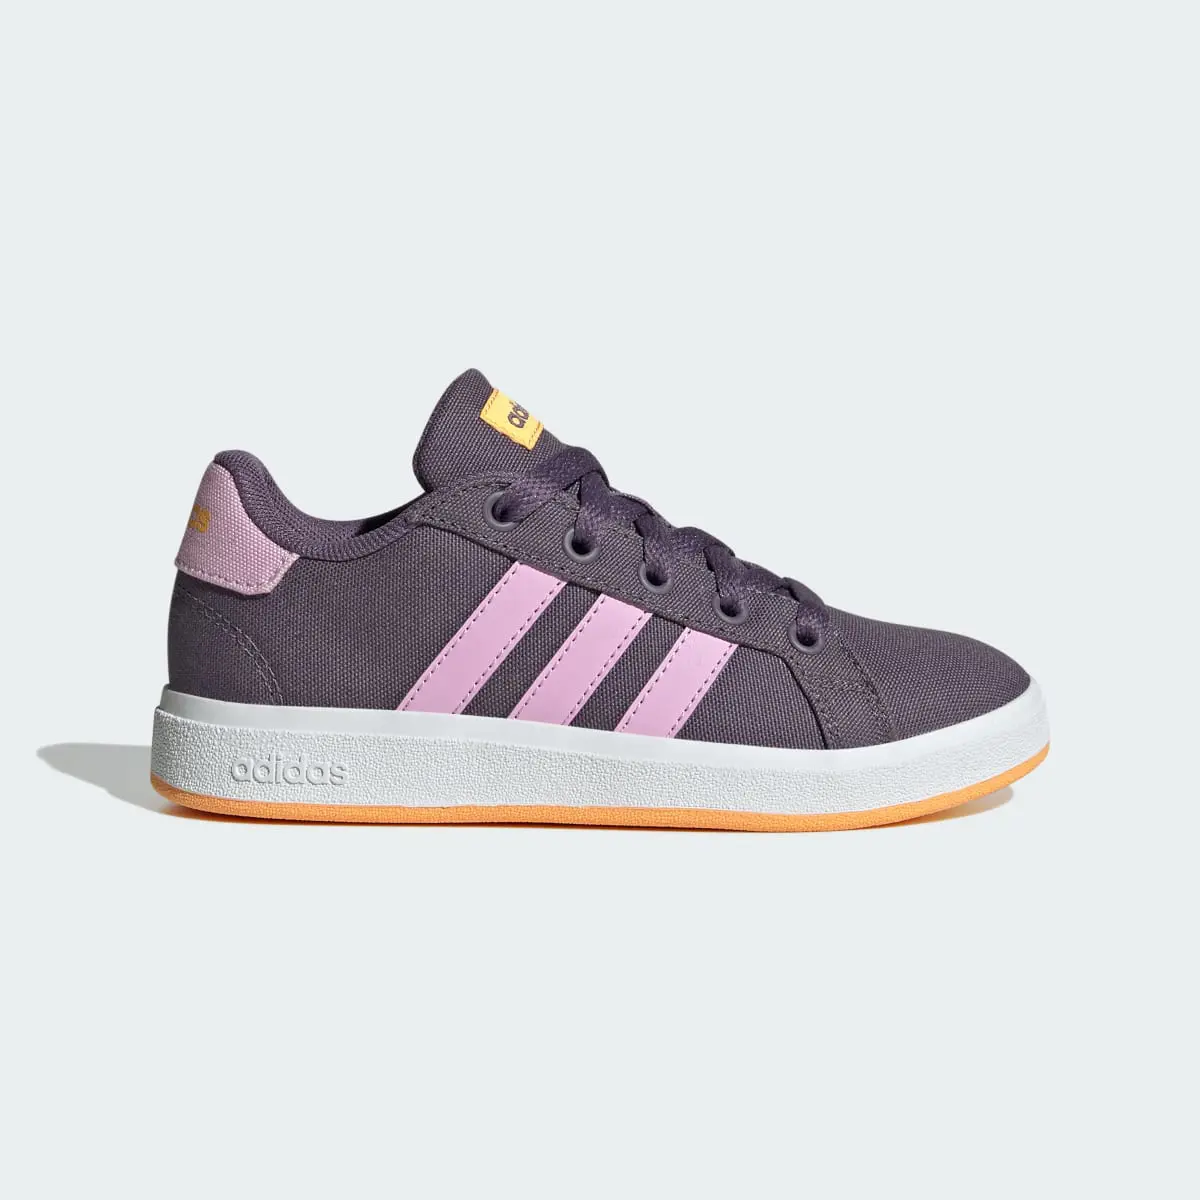 Adidas Grand Court 2.0 Shoes Kids. 2